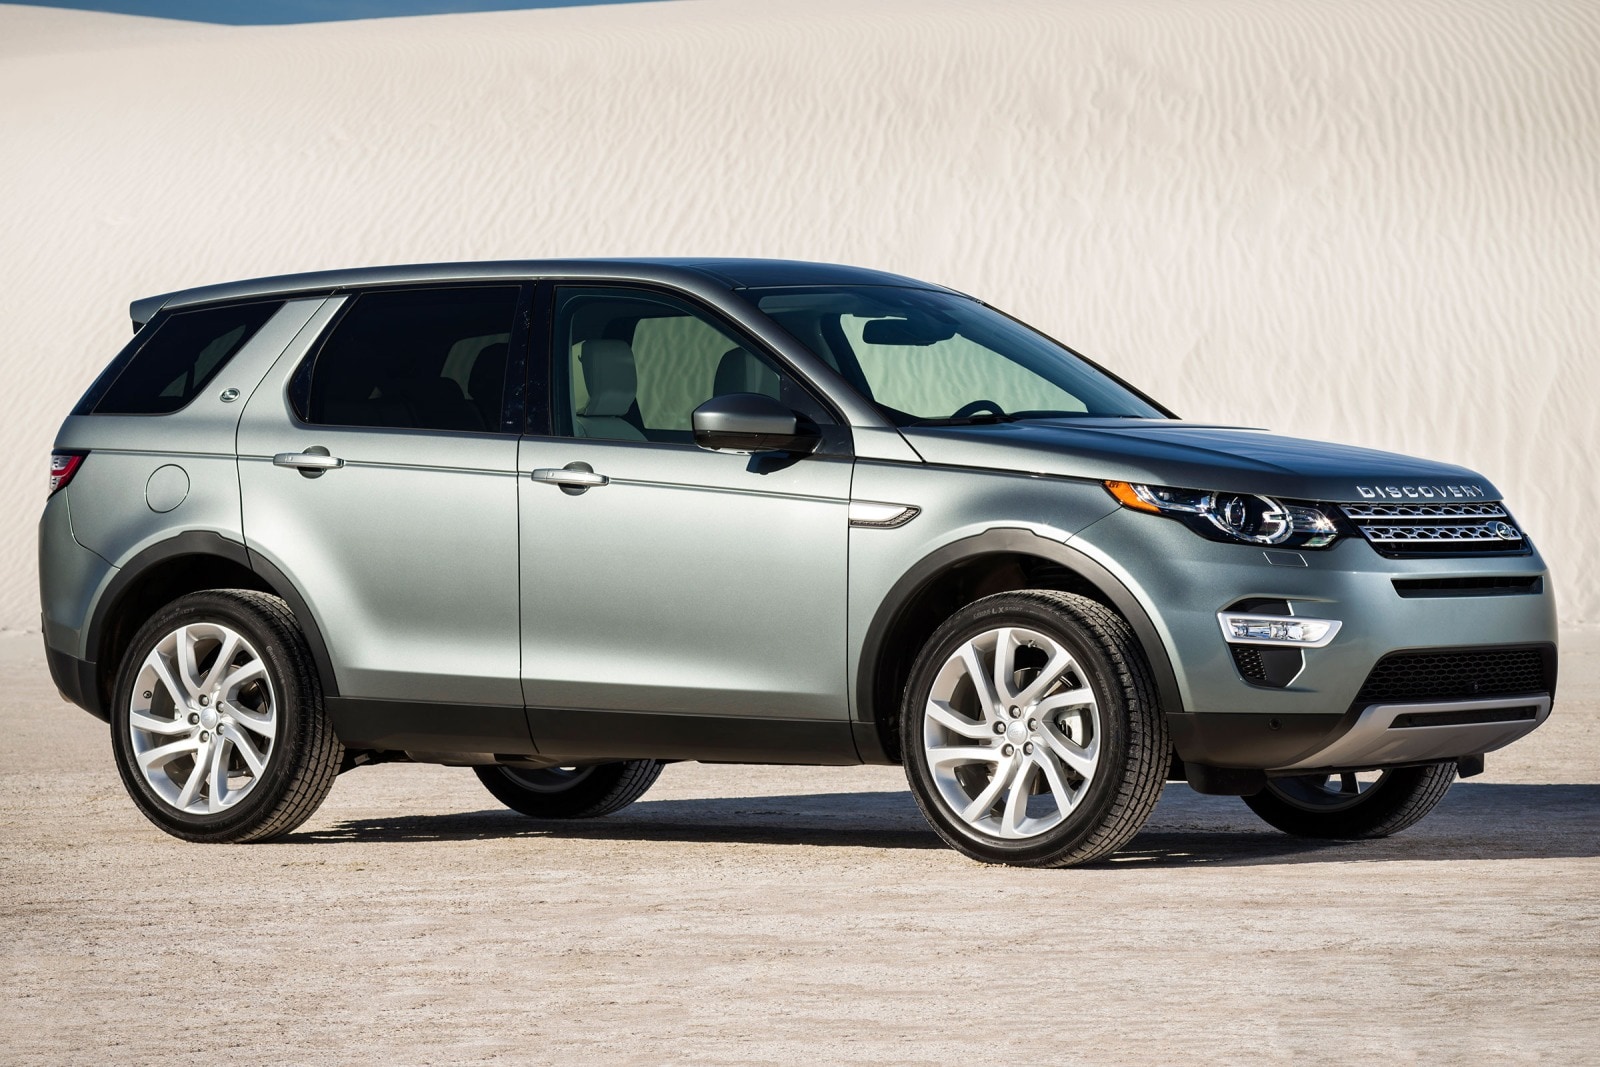 2016 Land Rover Discovery Sport Review & Ratings | Edmunds